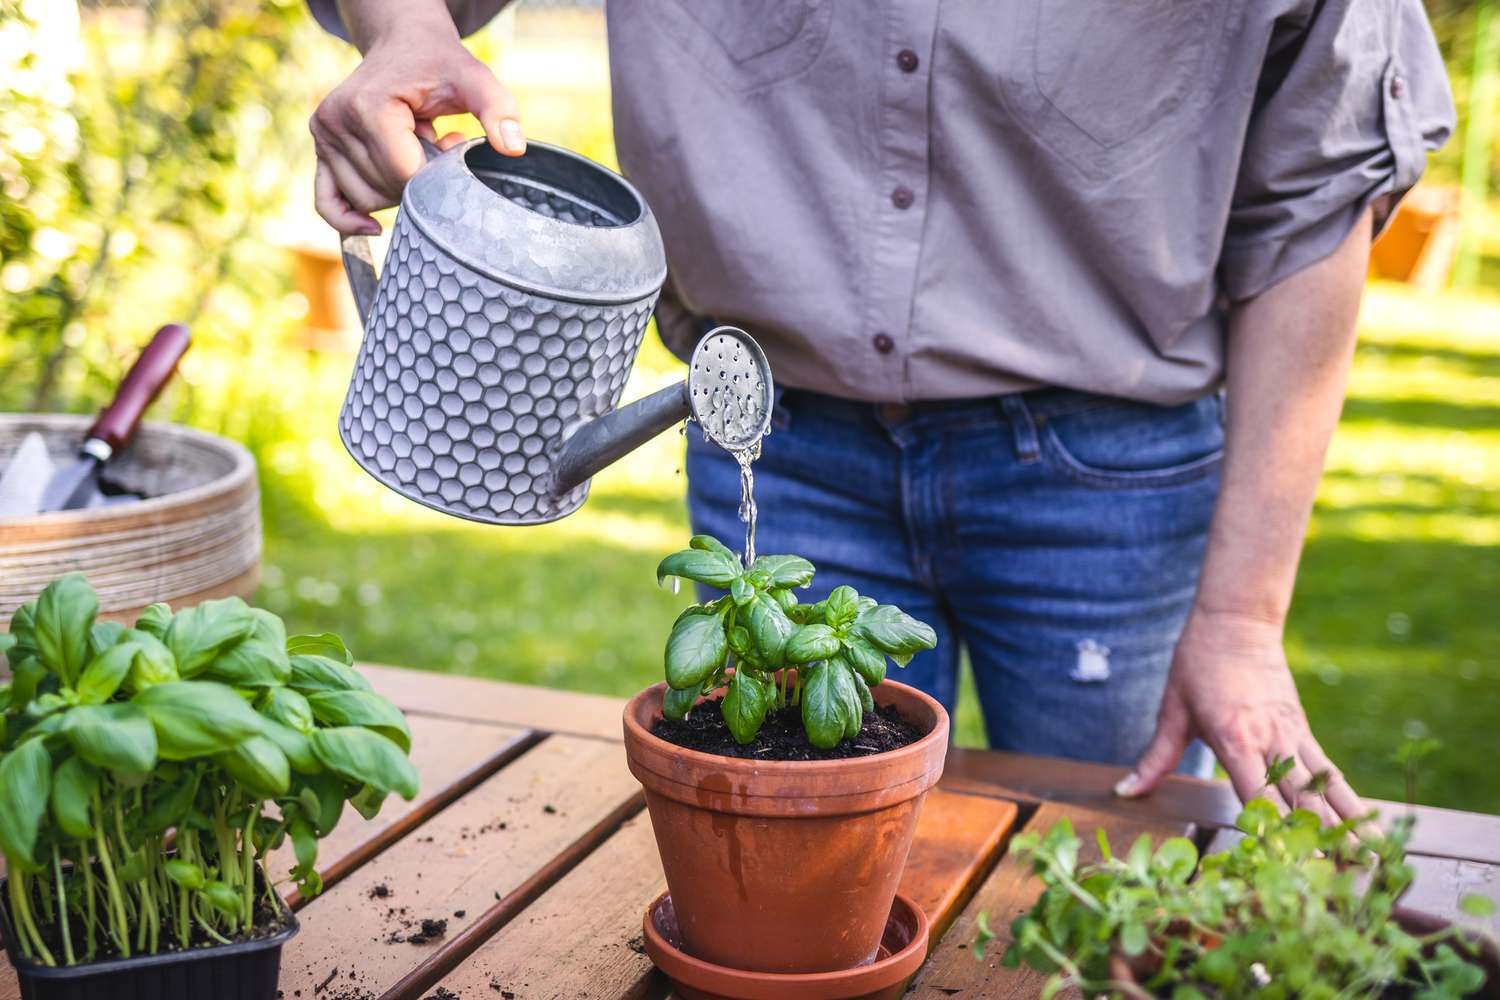 How Often Should I Water Outdoor Potted Plants?